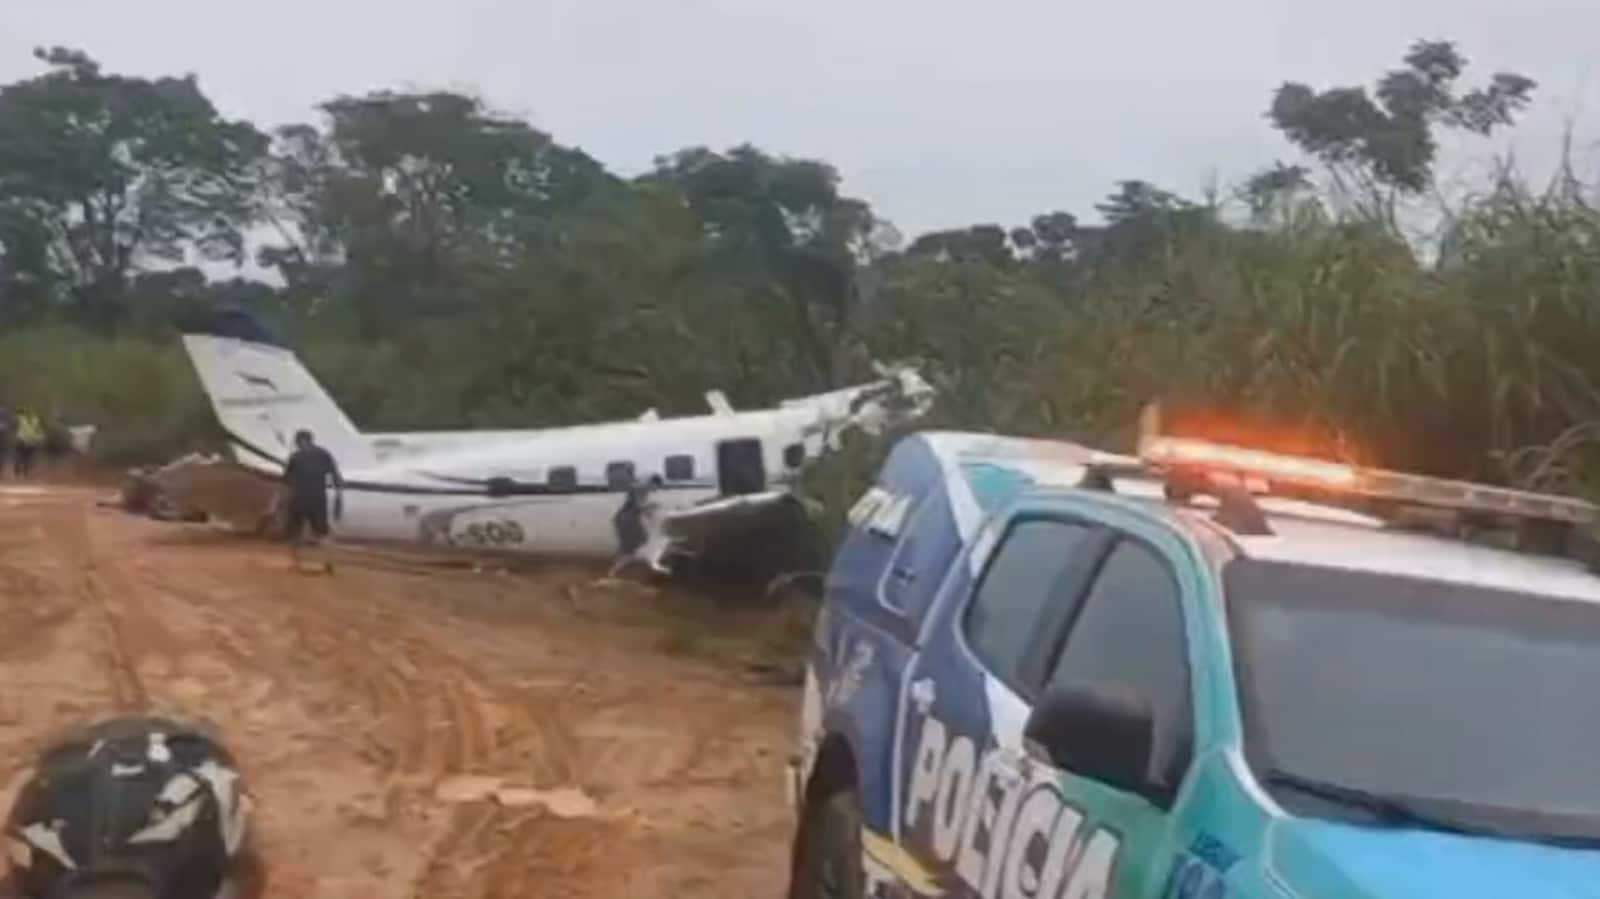 14 killed after aircraft carrying US tourists crashes in Brazil | World News